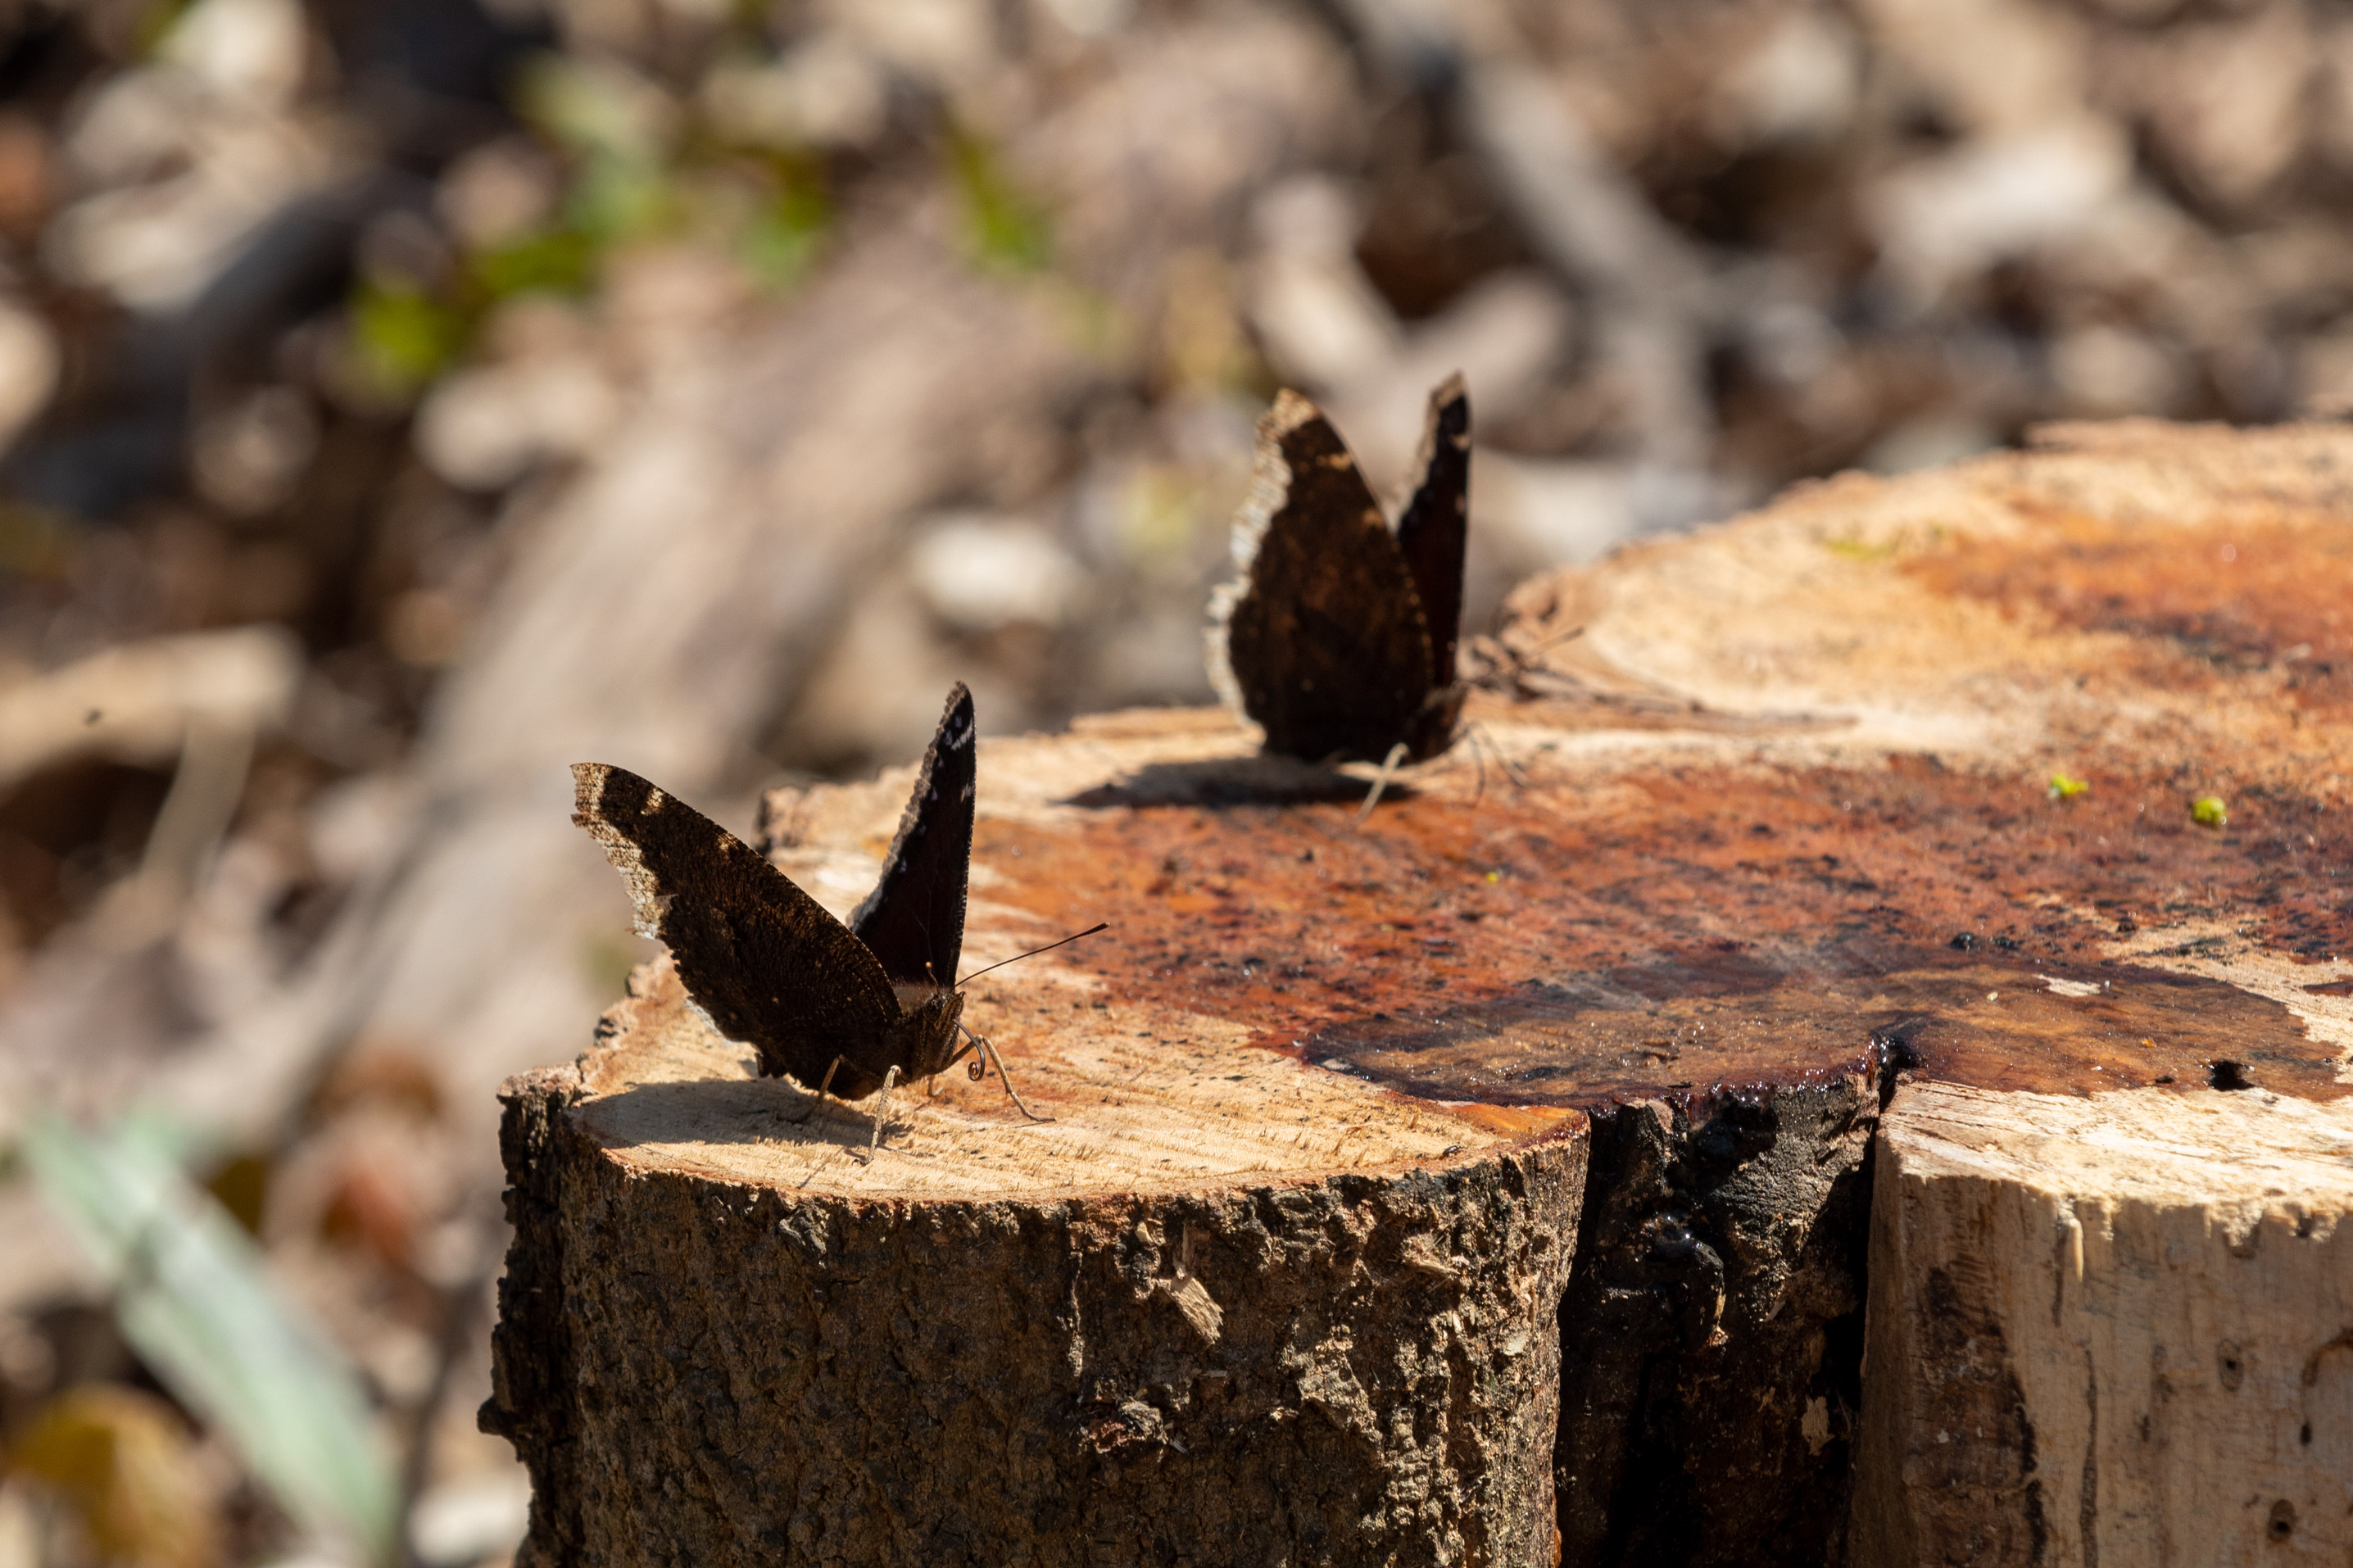 Two butterflies with brown, blue, and white wings sipping sap from a tree stump